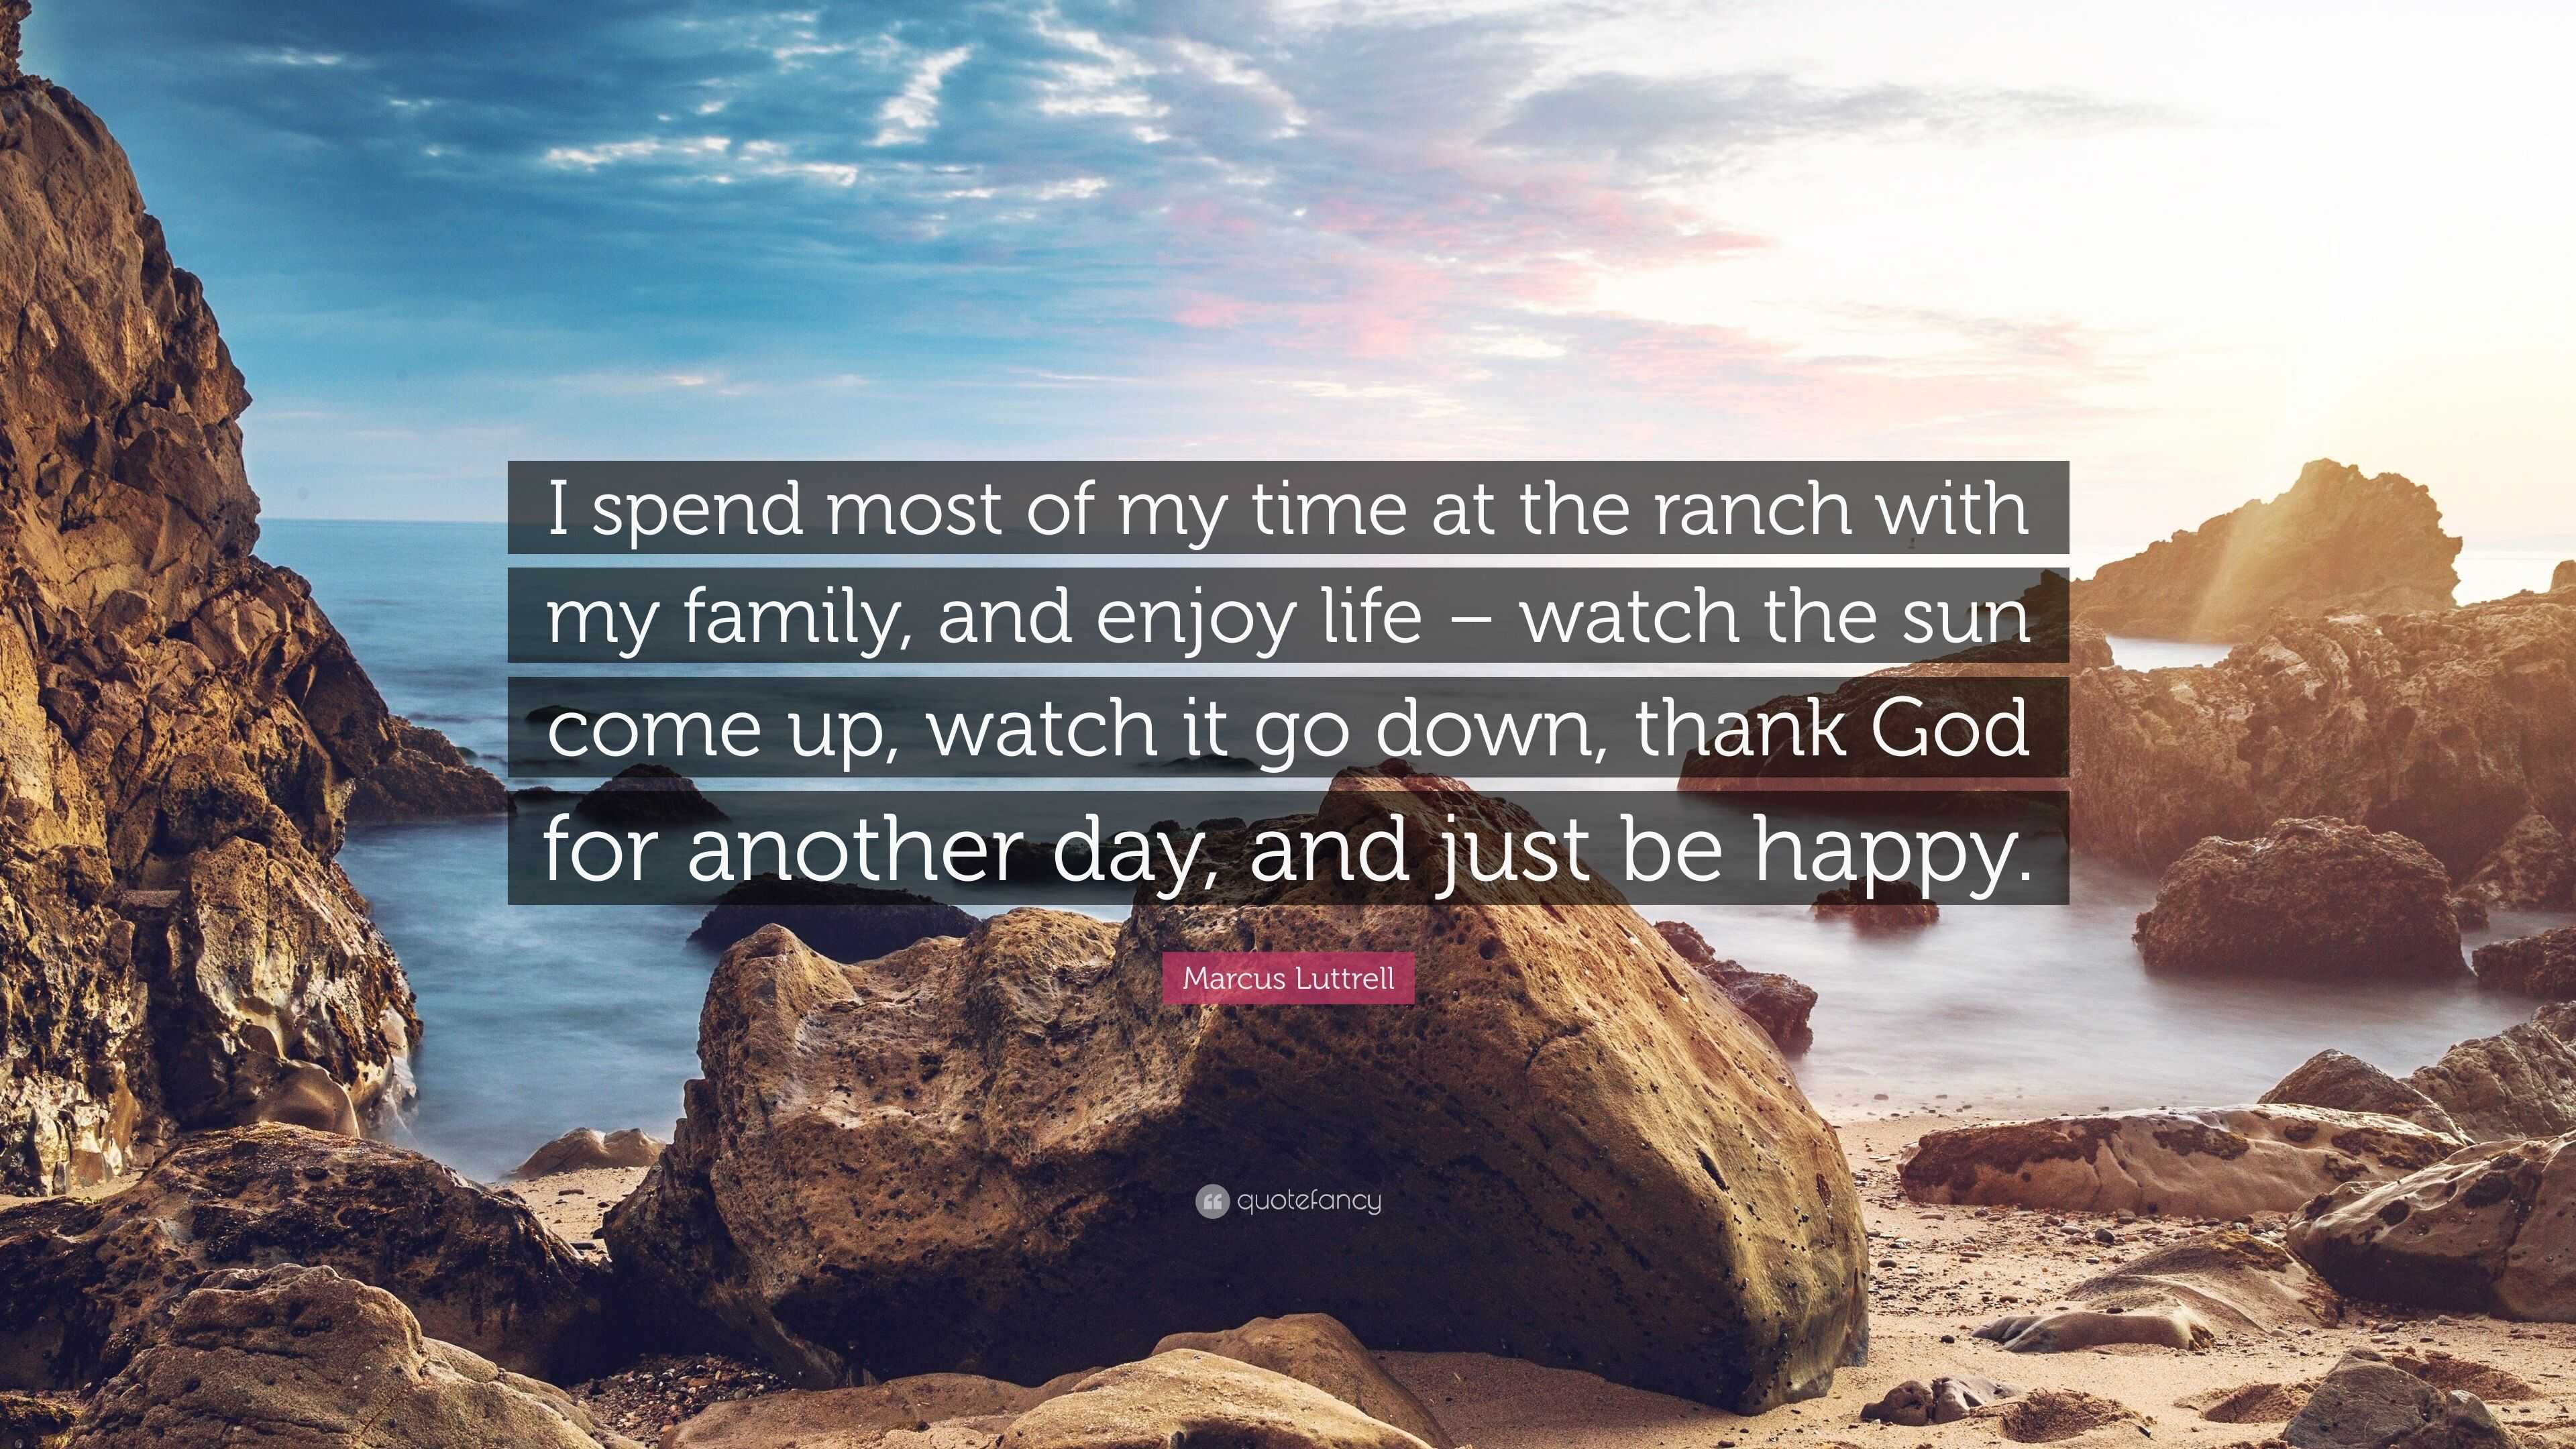 Marcus Luttrell Quote “I spend most of my time at the ranch with my